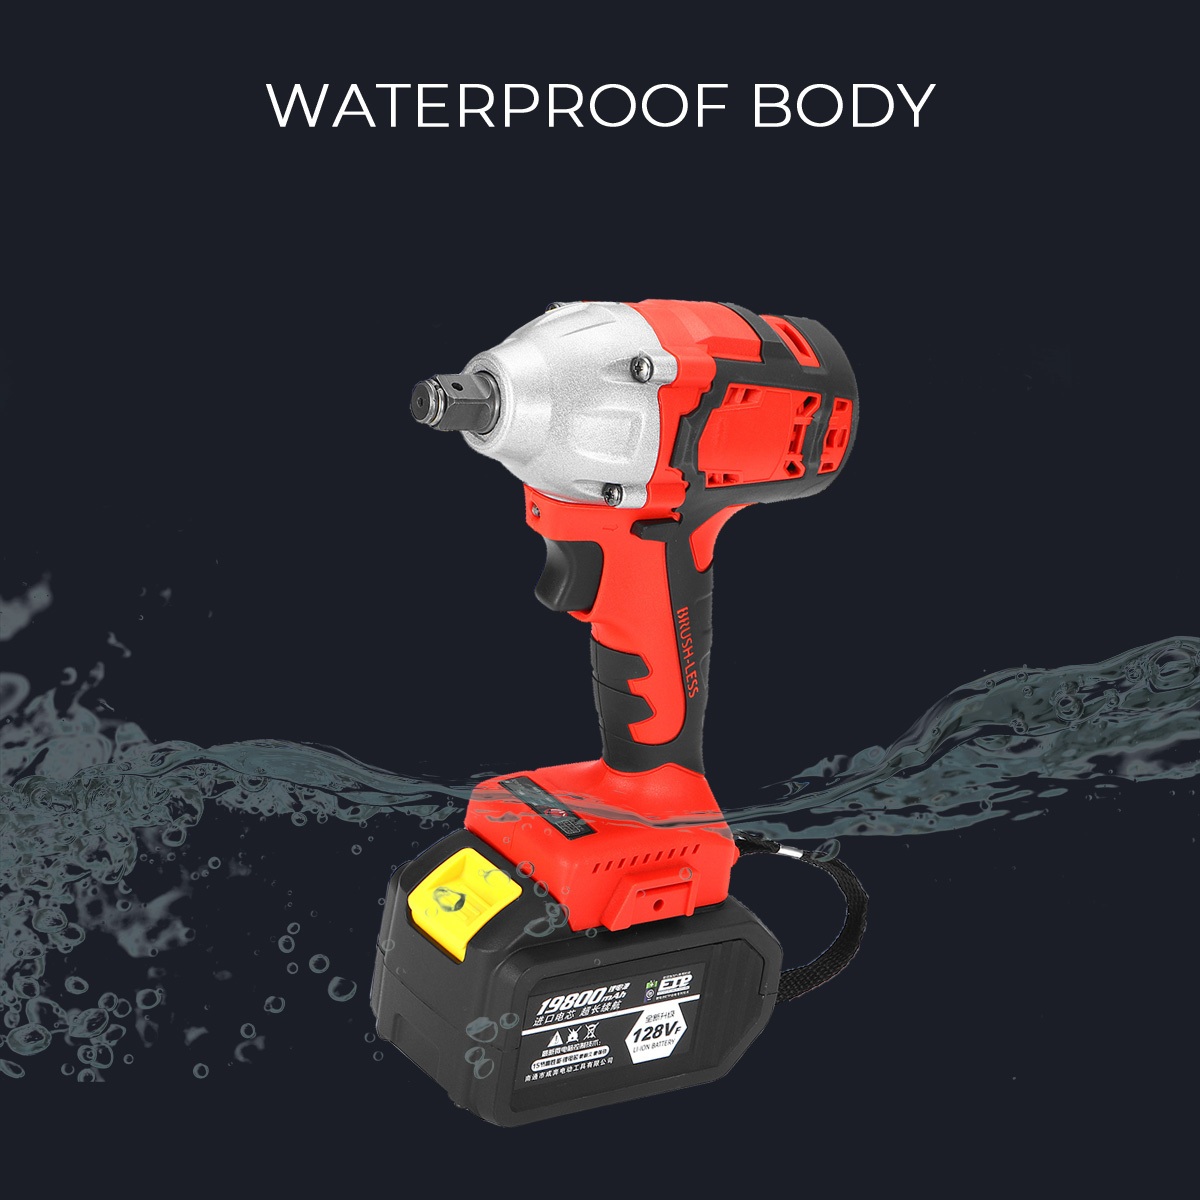 128VF-19800mah-Electric-Impact-Wrench-Brushless-Cordless-Drill-Tool-With-Battery-1685512-9